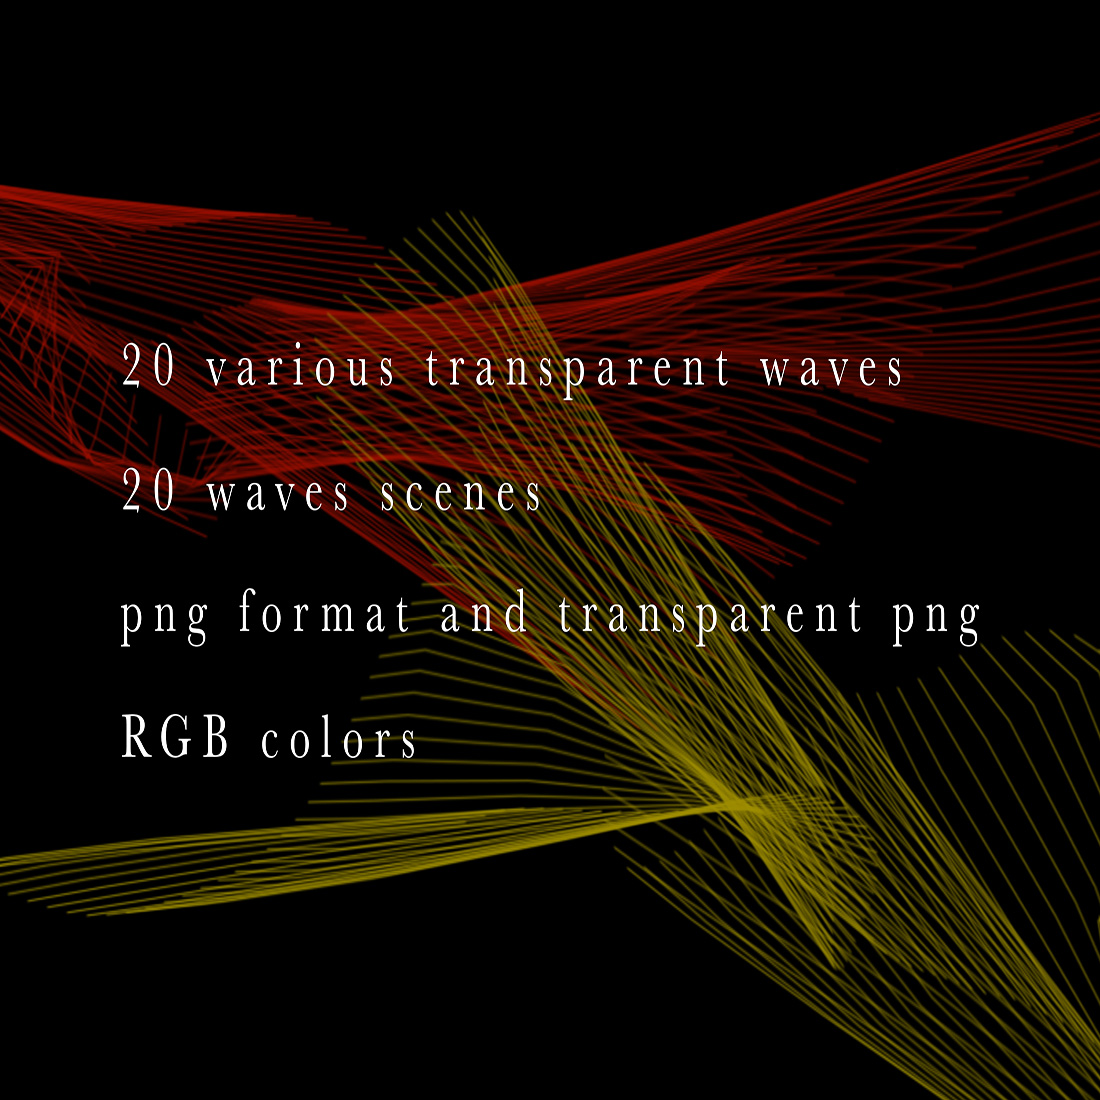 Wave Abstraction - Modern Effect Waves cover image.